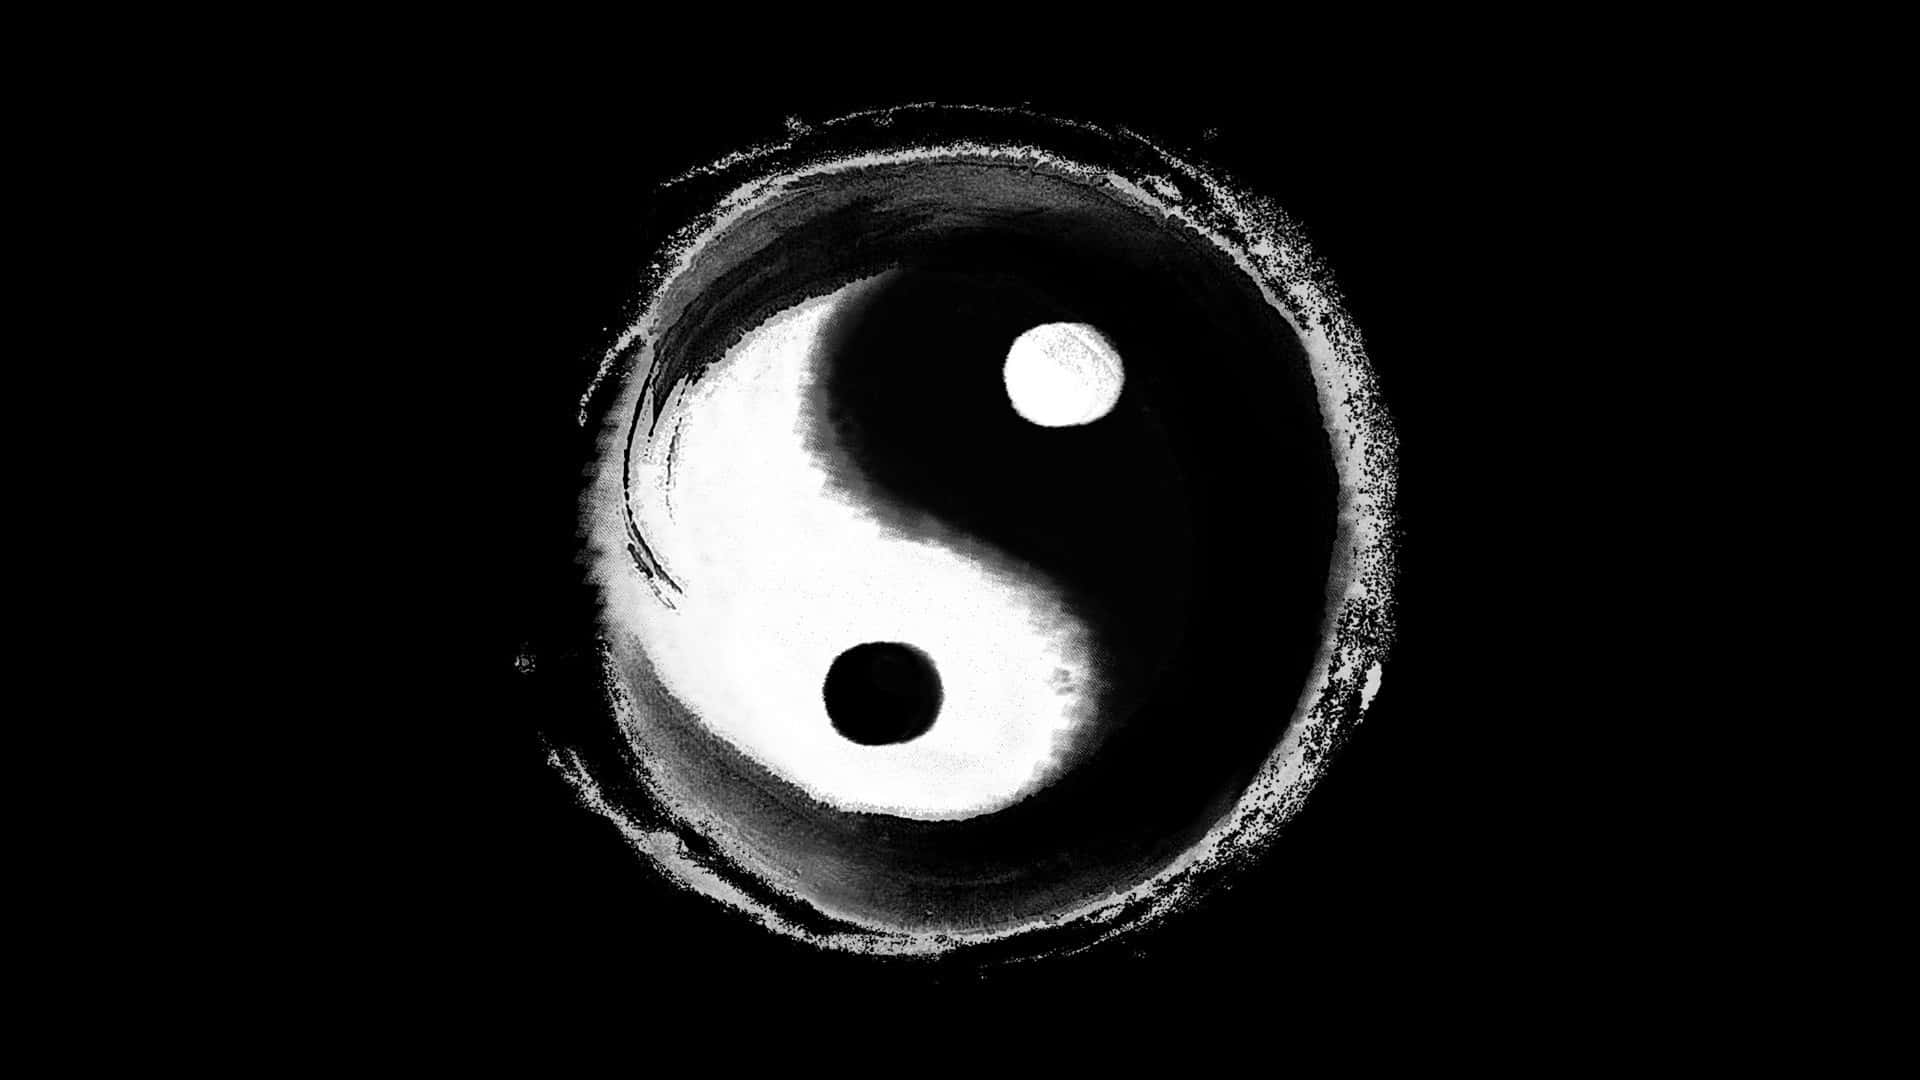 Yin and Yang symbol representing the interconnected harmony of opposites